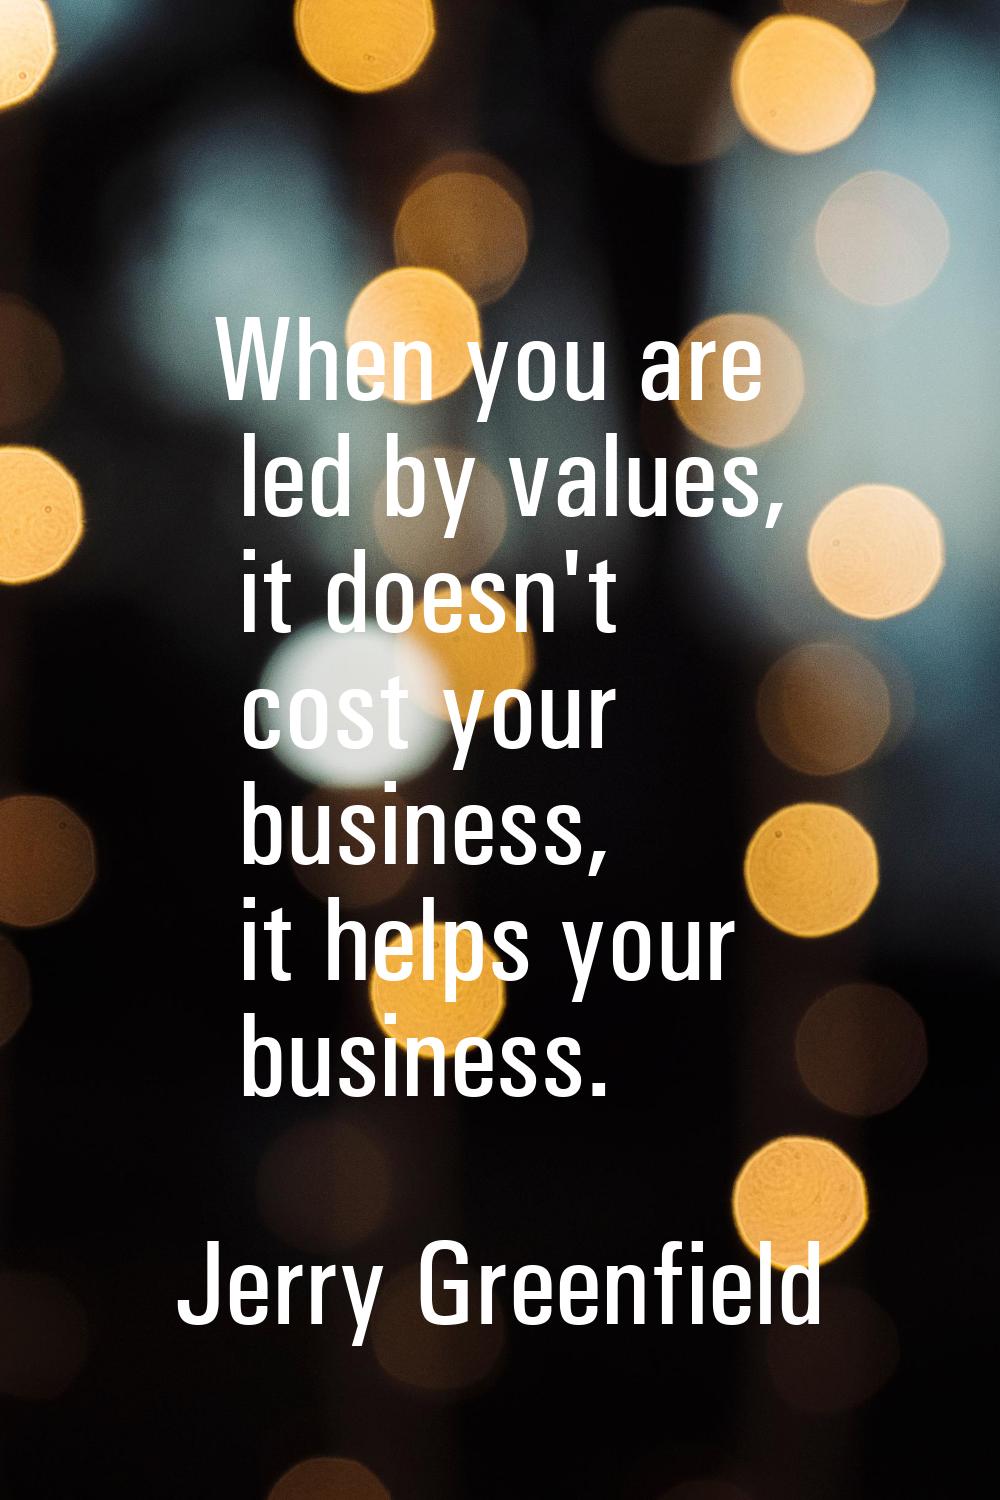 When you are led by values, it doesn't cost your business, it helps your business.